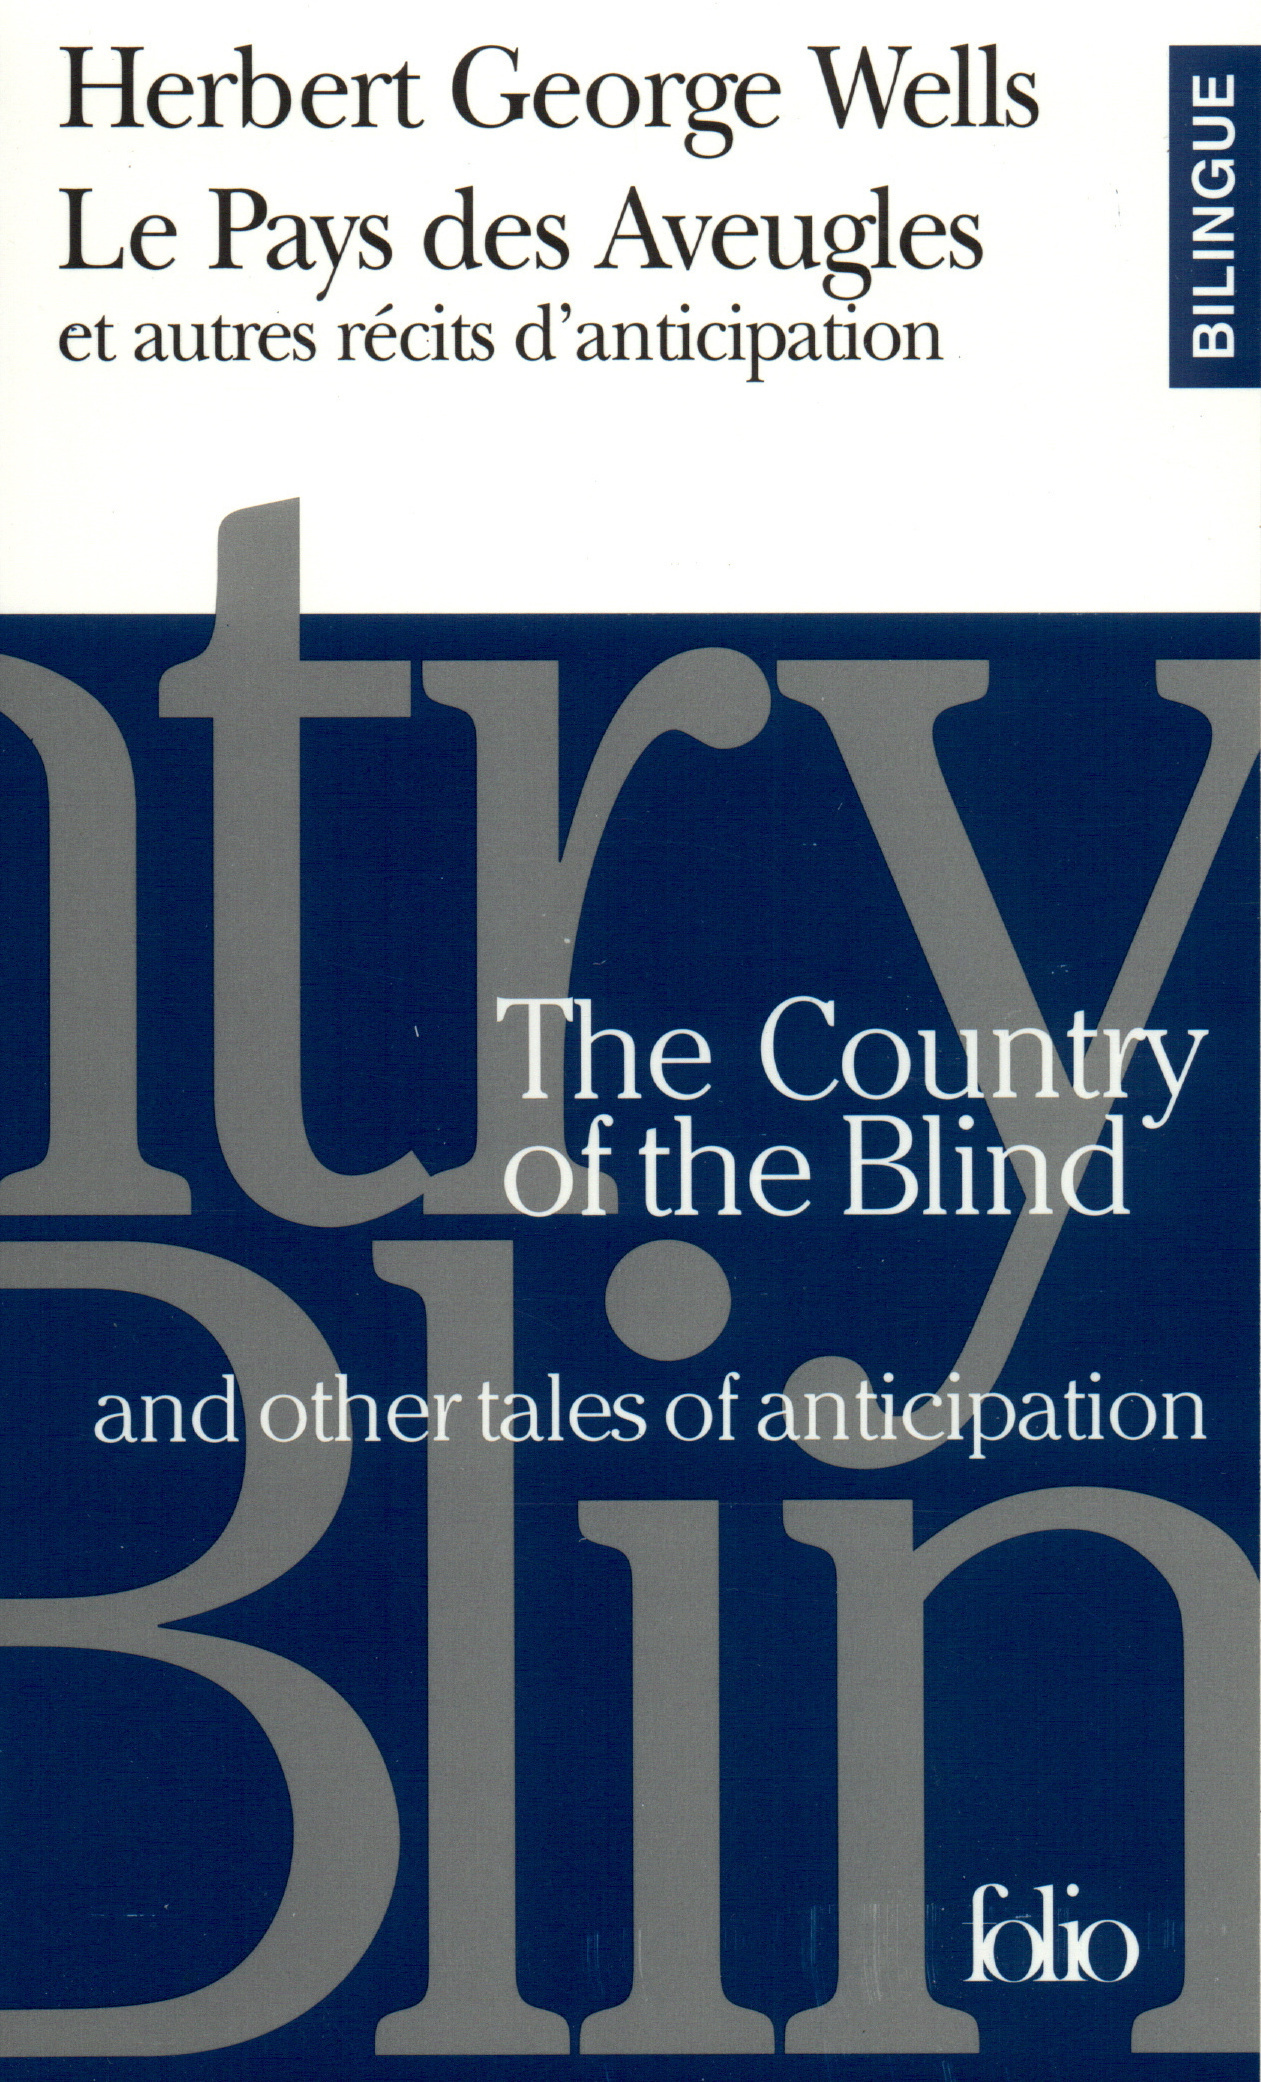 Le Pays des Aveugles et autres récits d'anticipation/The Country of the Blind and other tales of anticipation (9782070411405-front-cover)